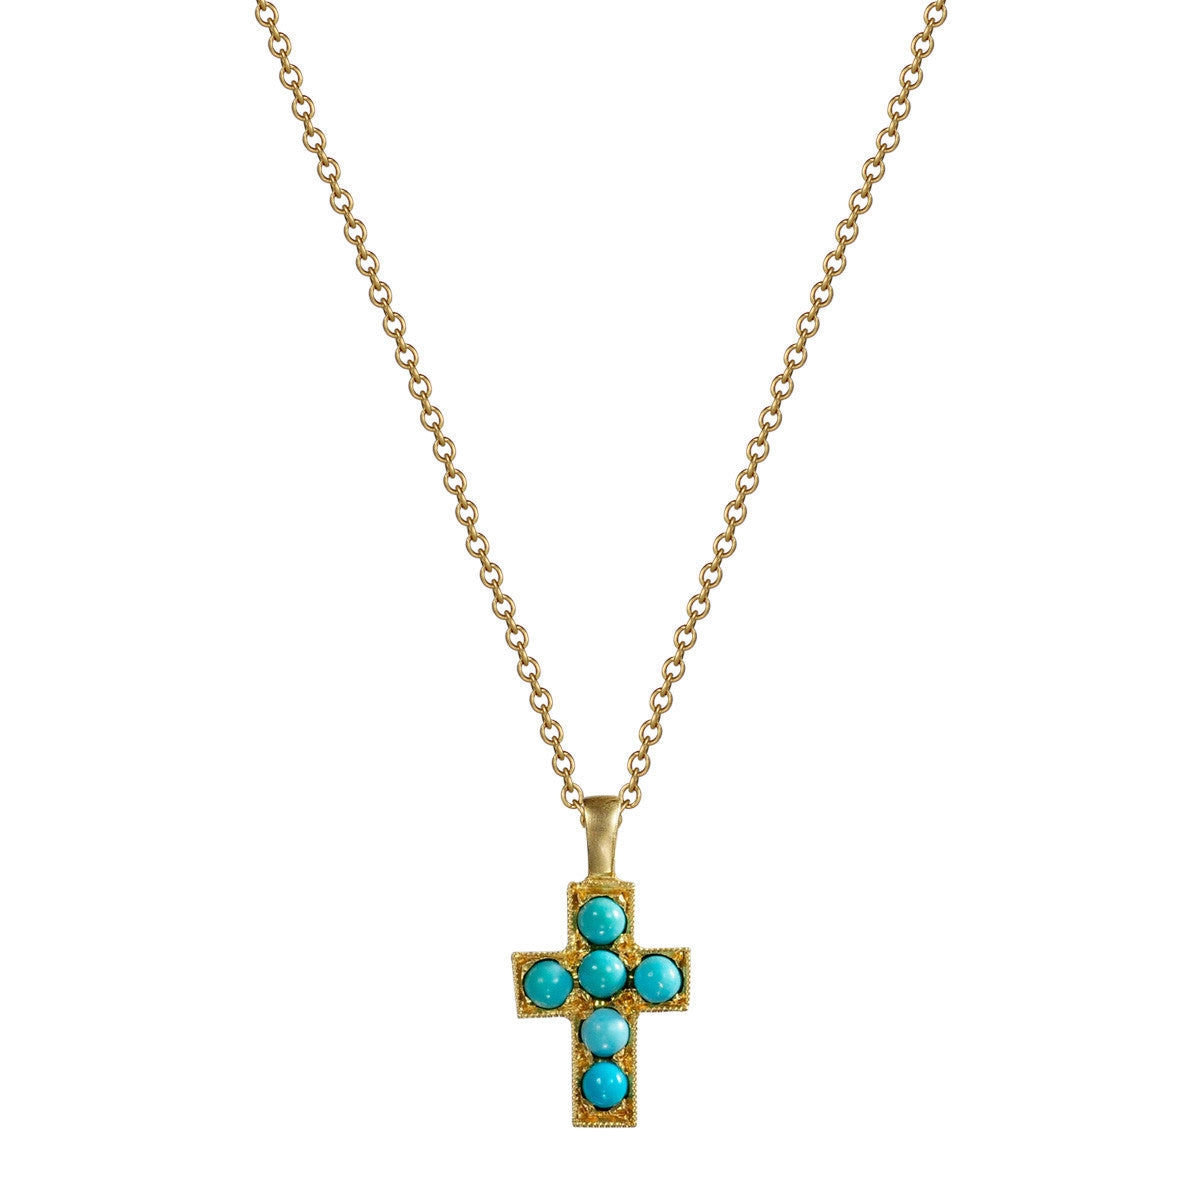 18K Gold Cross Pendant with Turquoise Stones